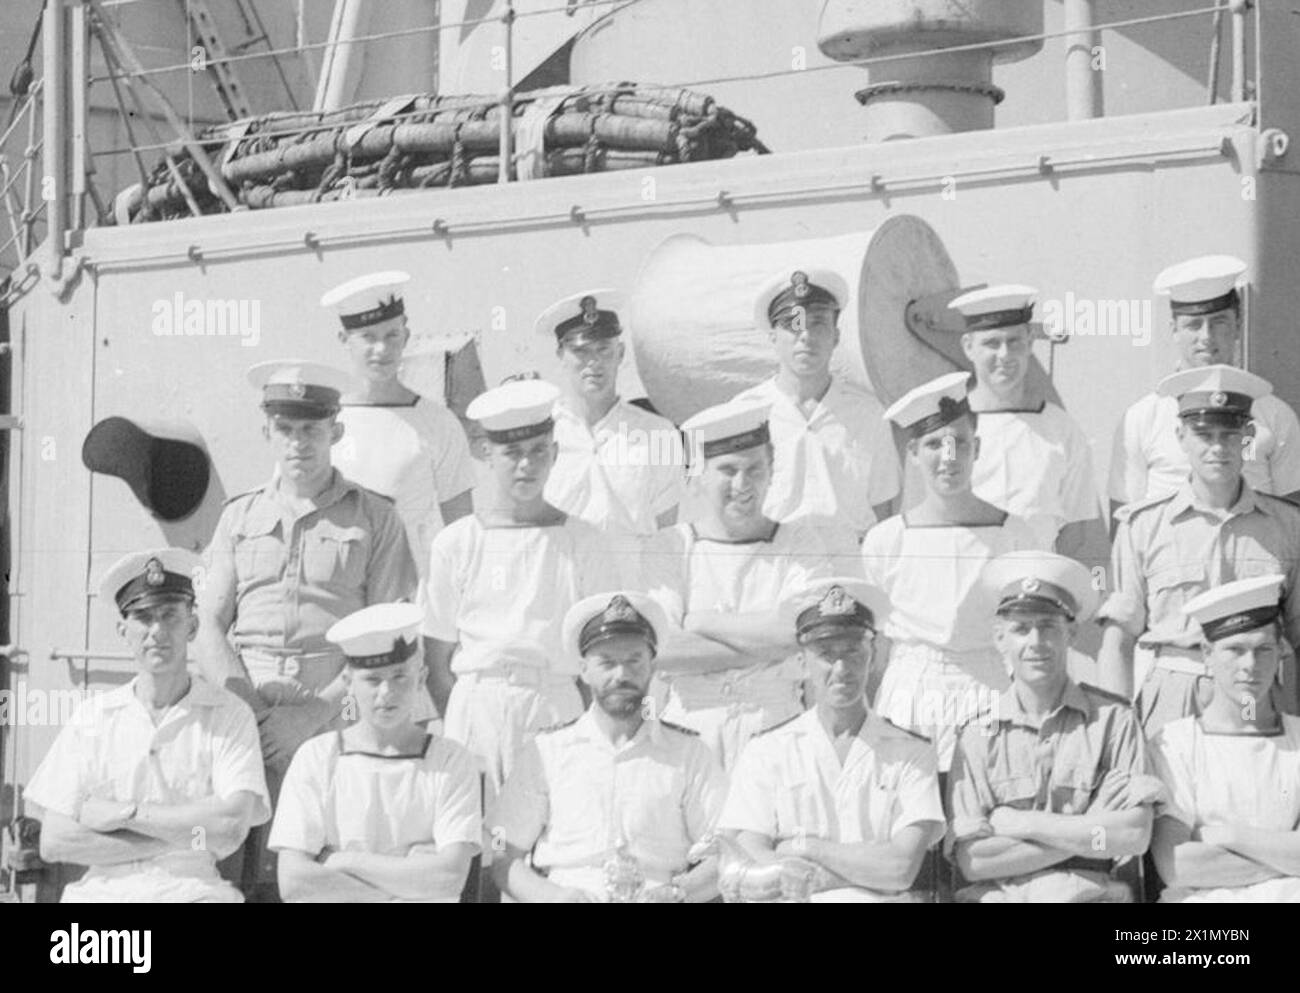 MEN OF THE HMS SUFFOLK, A CRUISER SERVING WITH ADMIRAL JAMES SOMERVILLE'S EASTERN FLEET. 12 DECEMBER 1943, TRINCOMALEE. THE MEN ARE DIVIDED INTO GROUPS BY TOWN AND/OR DISTRICT. - Suffolk group. Front row, left to right: Boy H Watts, Ipswich; Shpt C Randlesome, Lowestoft; AB D Bruce, Ipswich; Lieut Cdr Easey, RN, Lowestoft; Mr E Edwards, Gnr, RN, Leeston; Mne Bryant, Olton Bray; AB A Bray, Tudenham. Second row, left to right; Mne Cox, Ipswich; Sgt Phillips, RM, Woolpit; Boy B Watts, Felixstowe; AB S Collins, Felixstowe; O/Sea W Leggitt, Lowestoft. Third row, left to right: PO E Horsford, Ipswic Stock Photo